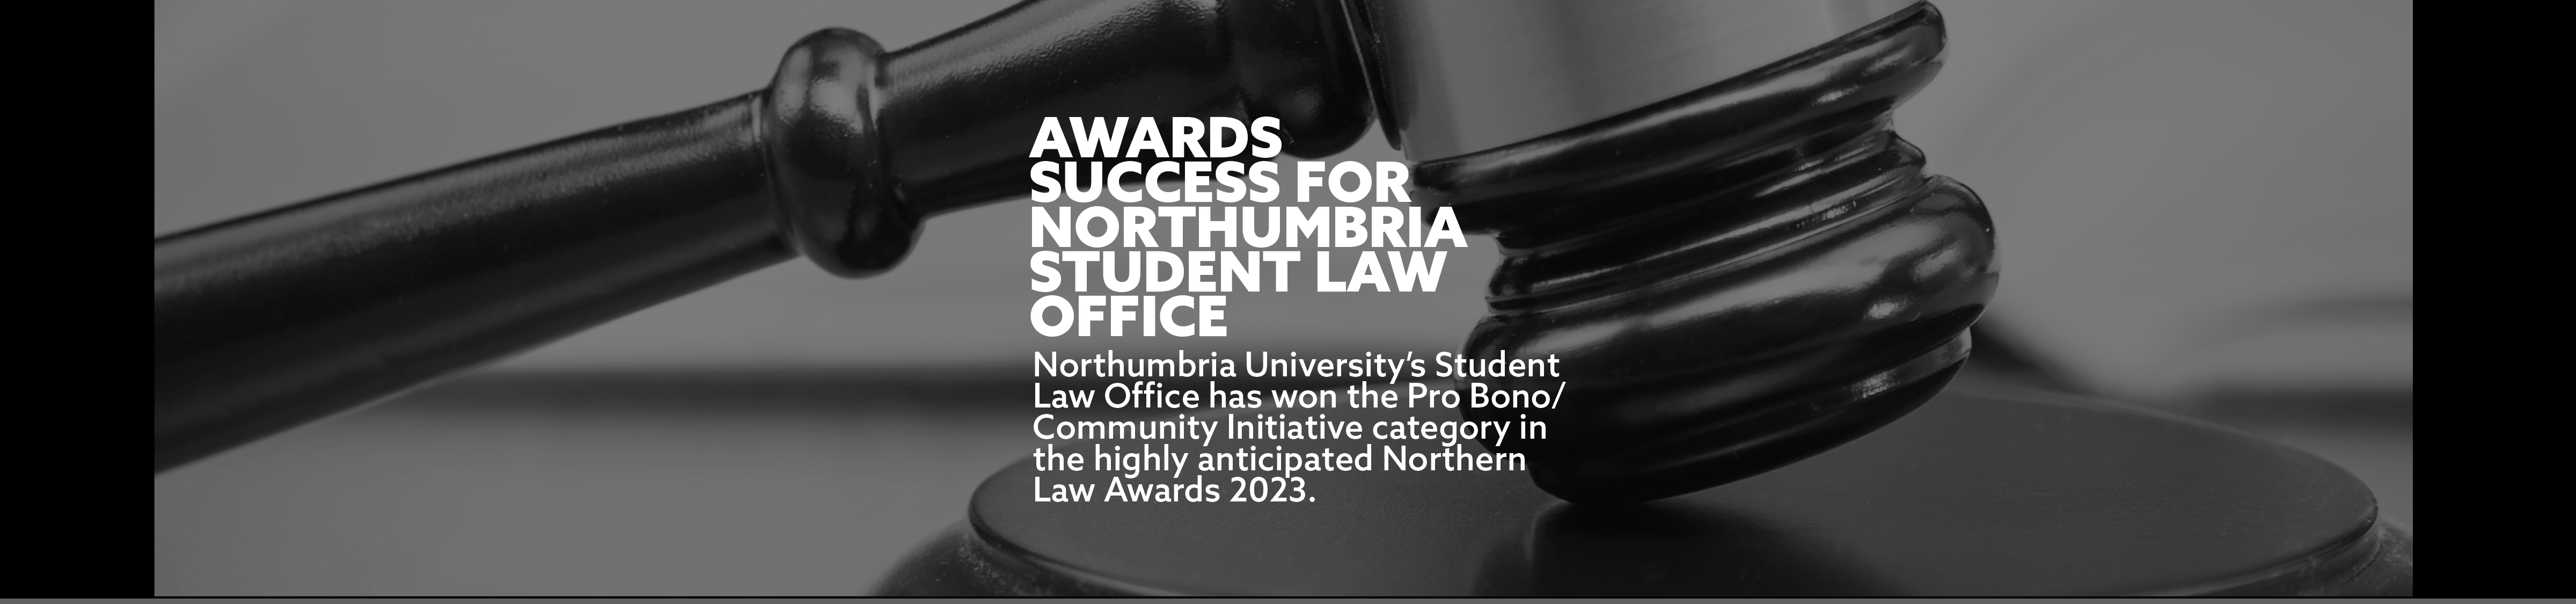 Awards success for northumbria student law office